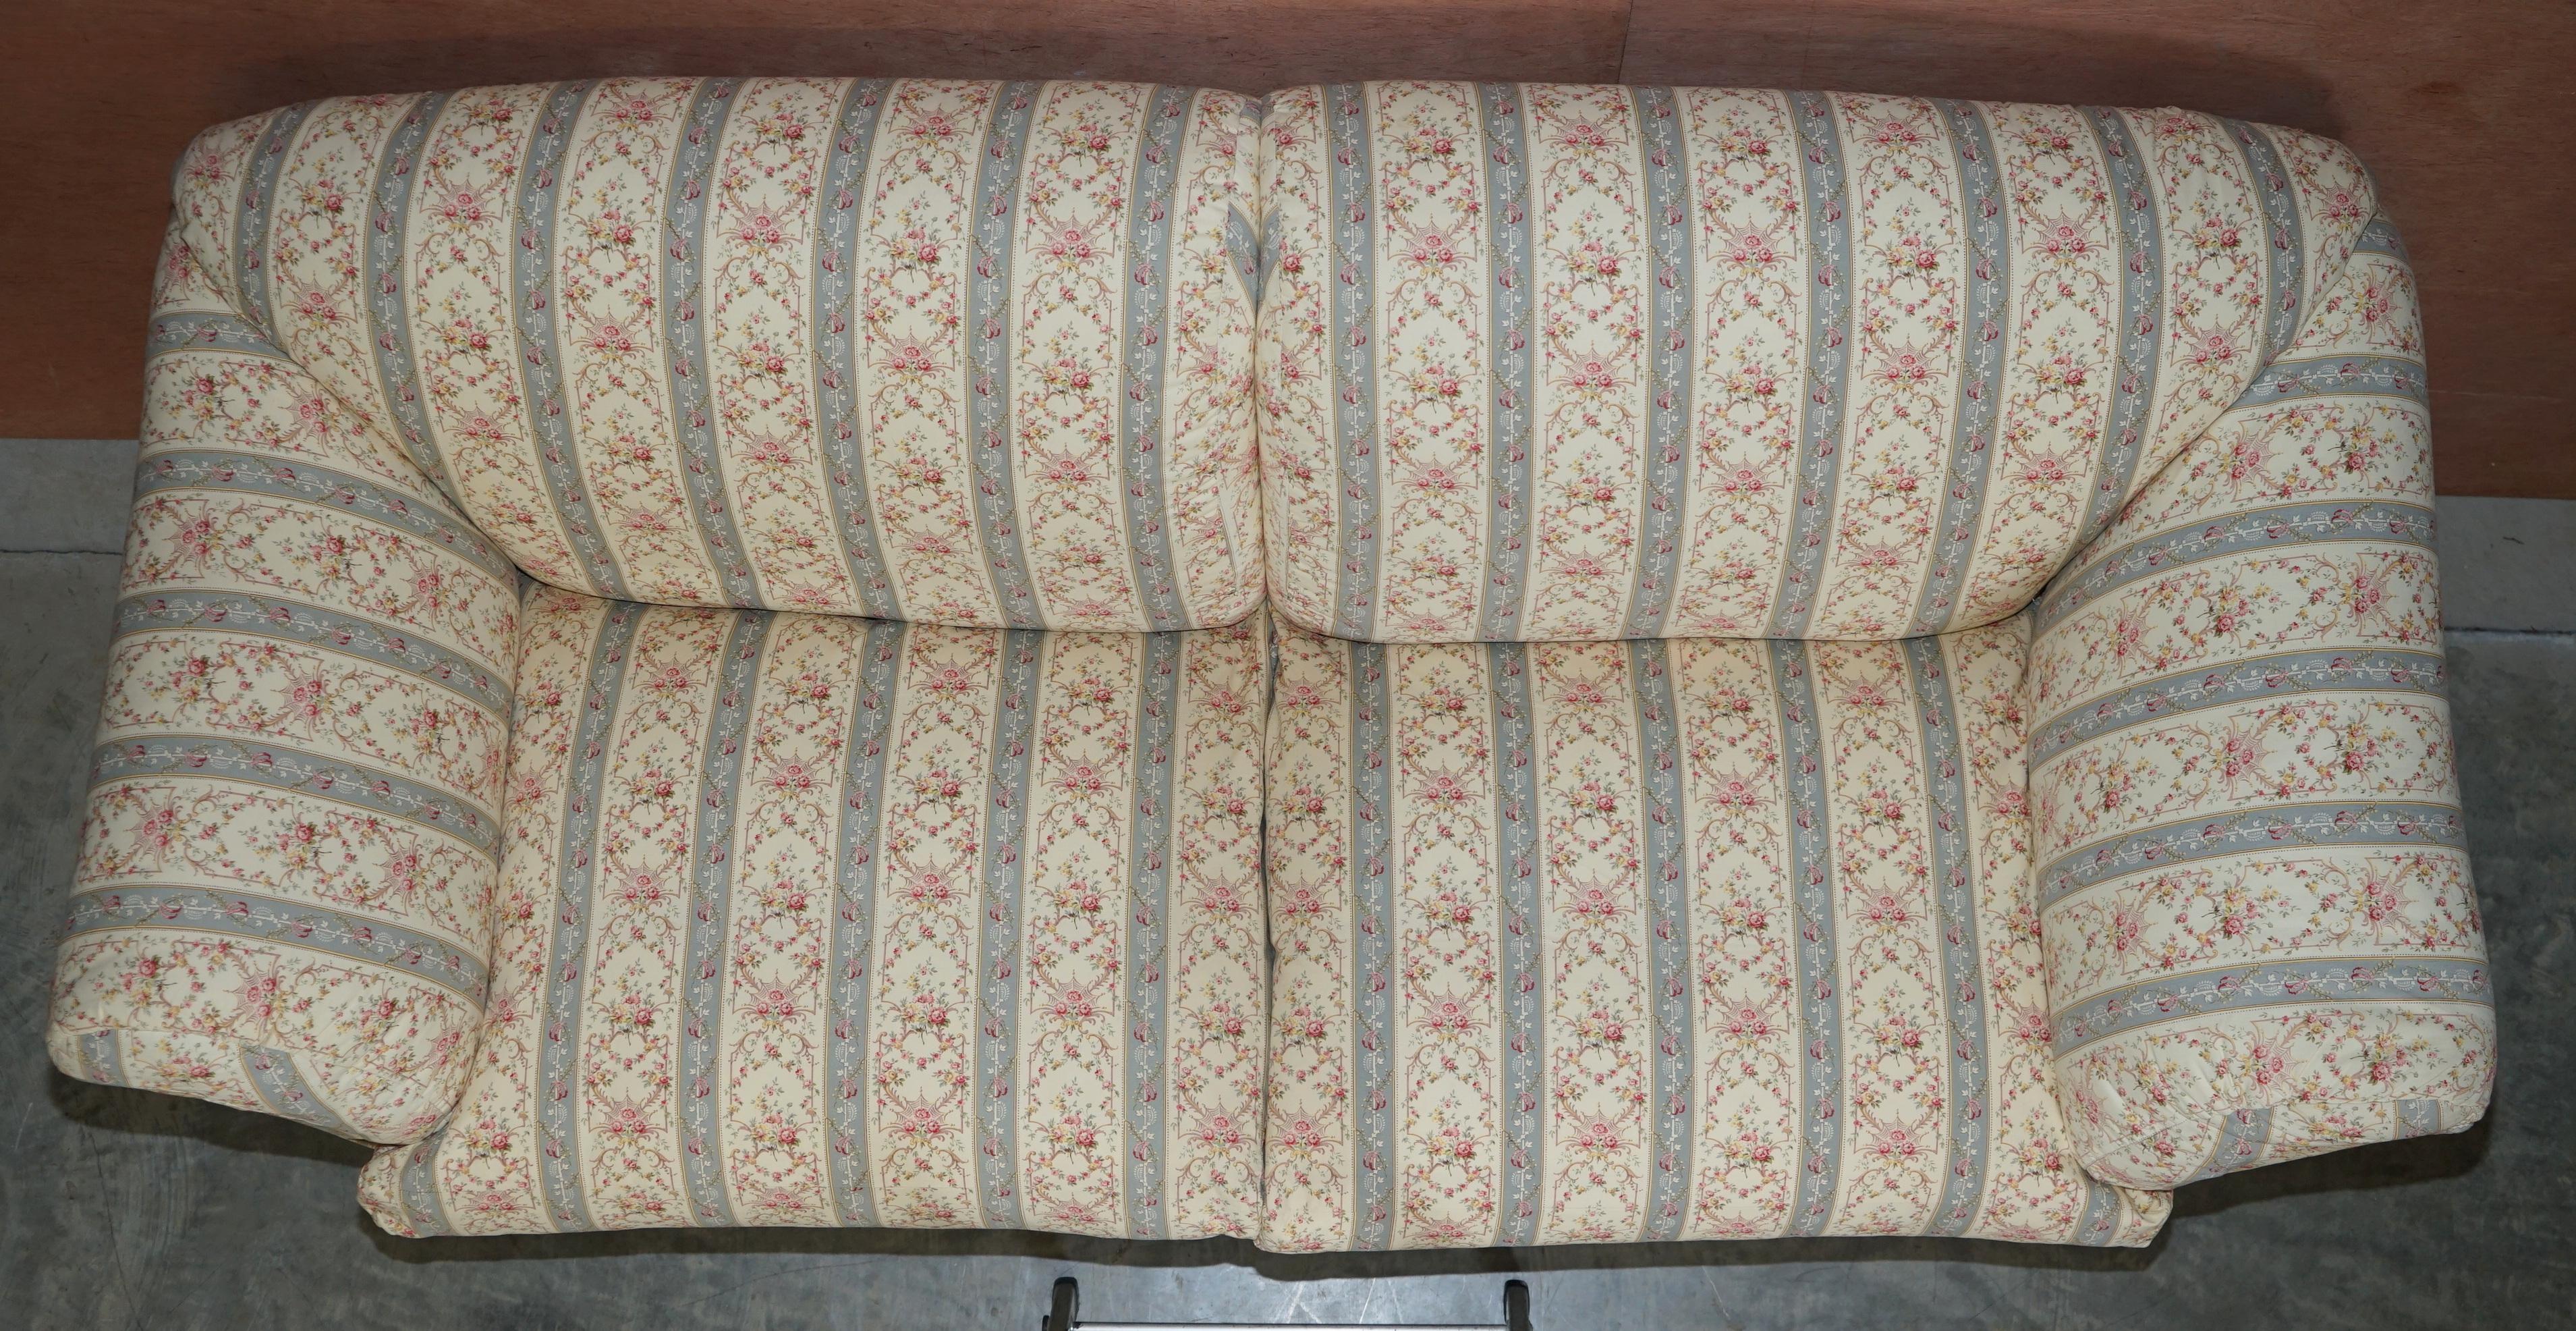 Early 20th Century Antique Howard & Sons Portarlington Large Sofa Original Ticking Upholstery For Sale